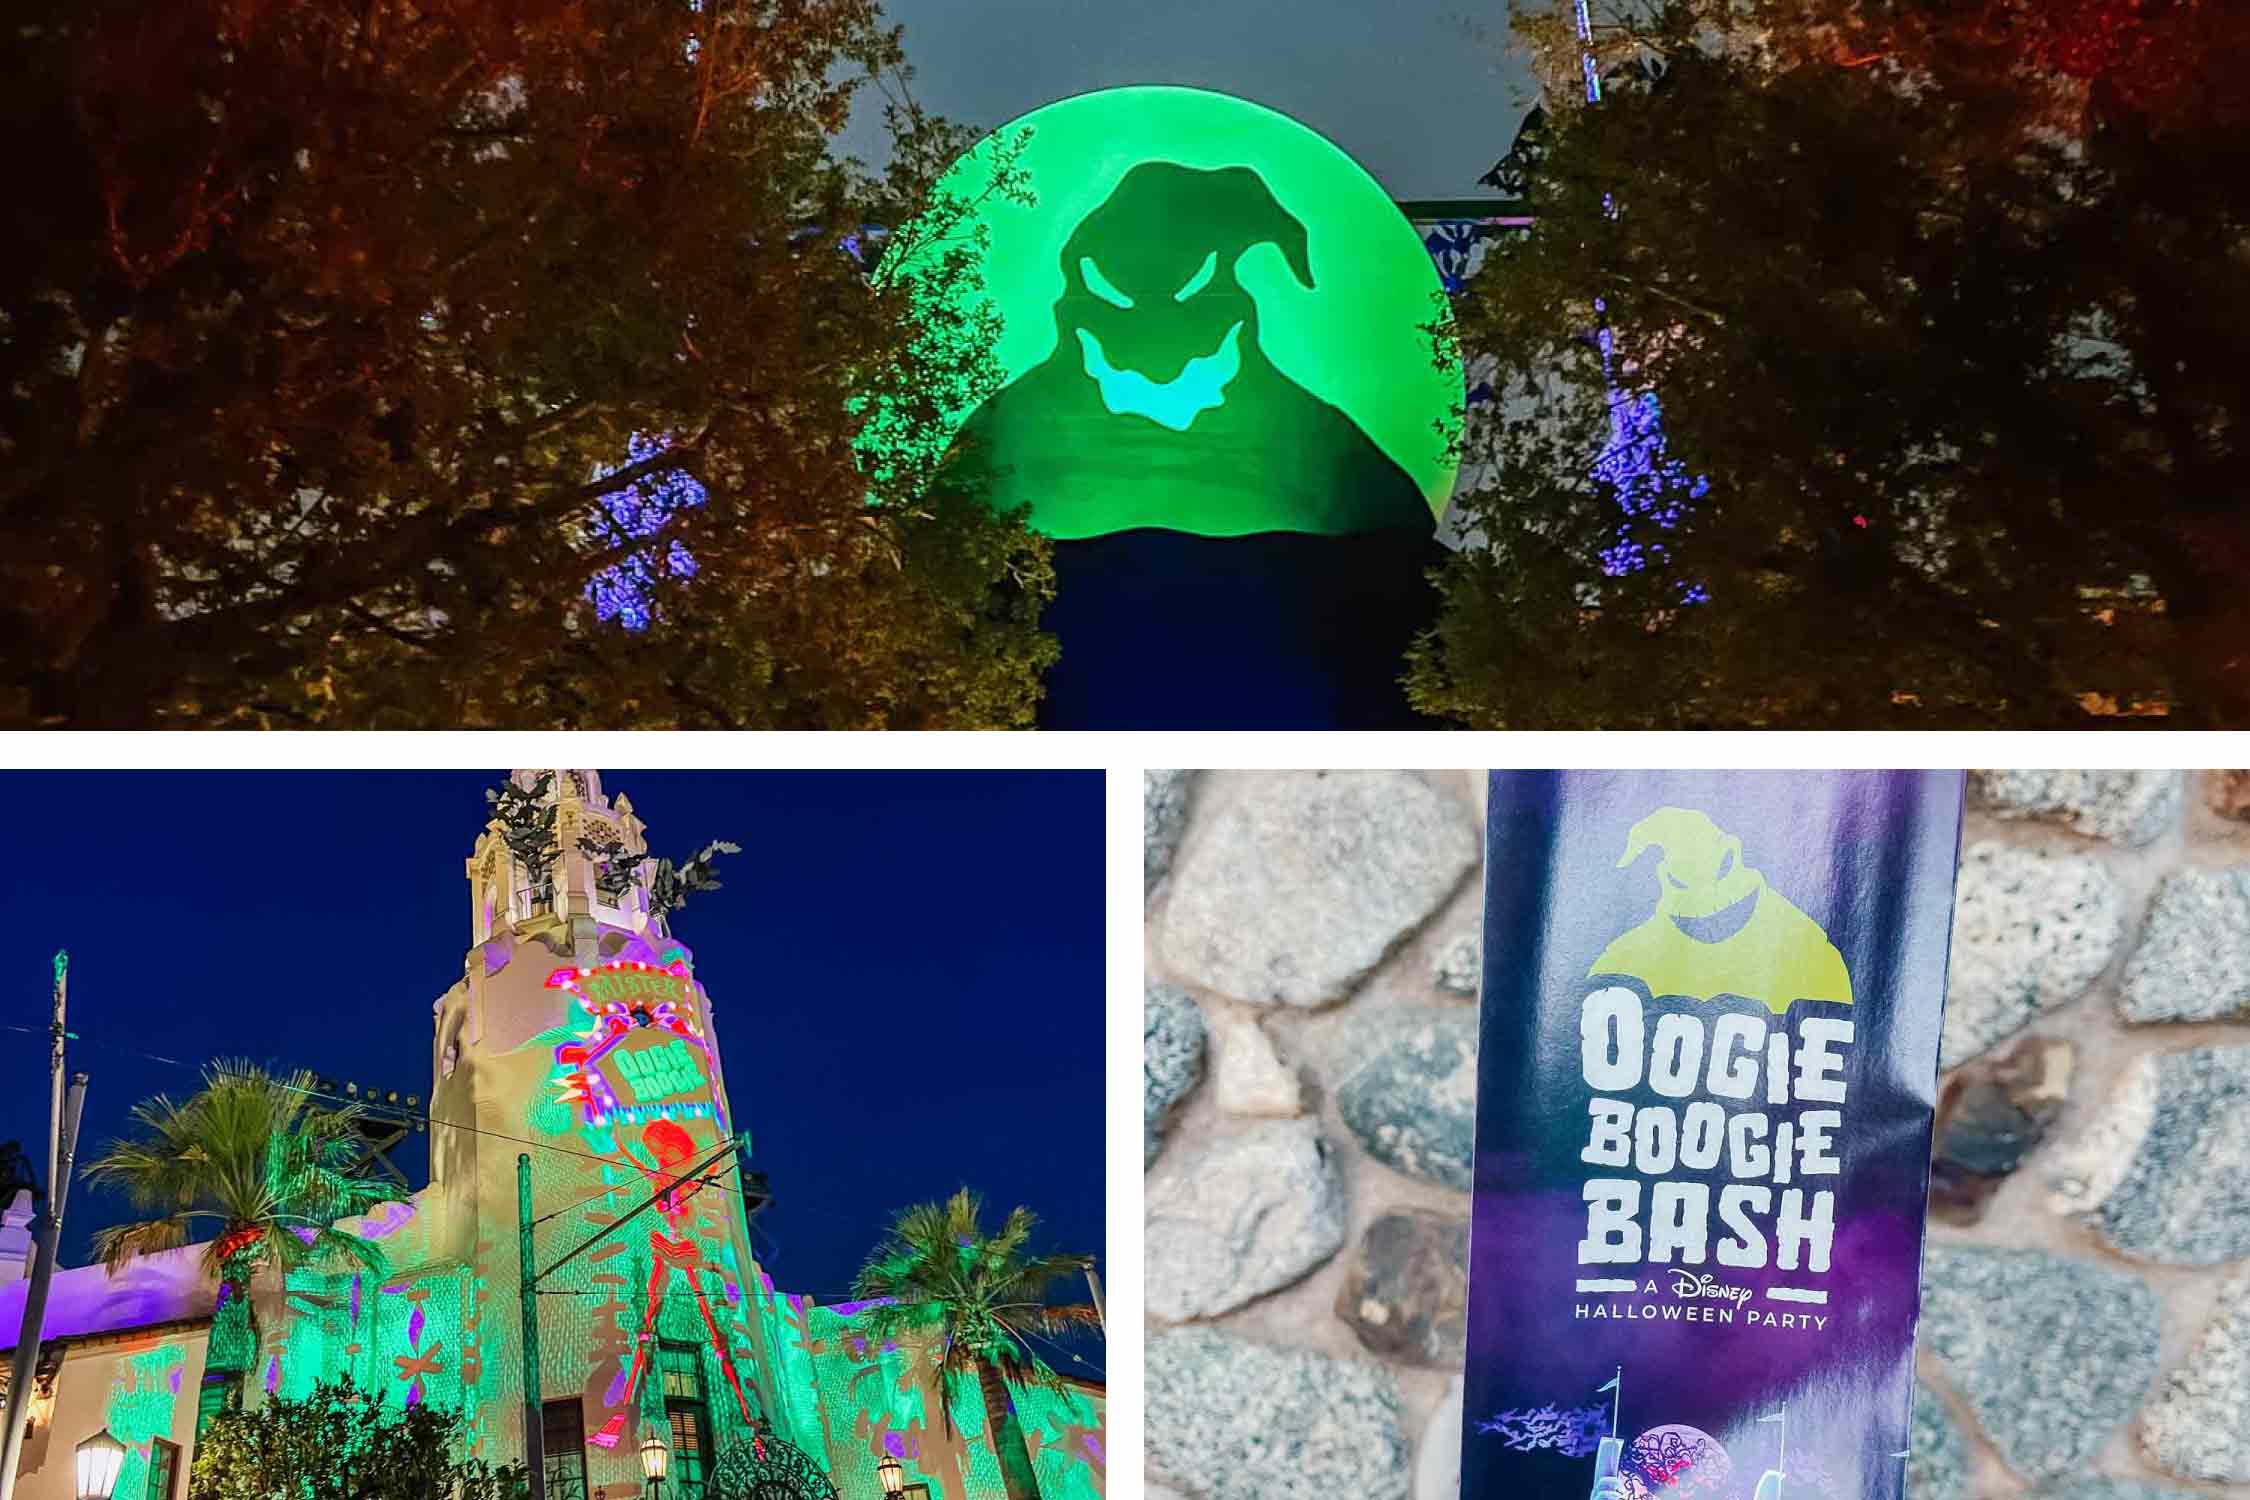 Oogie Boogie Bash 2022 Review